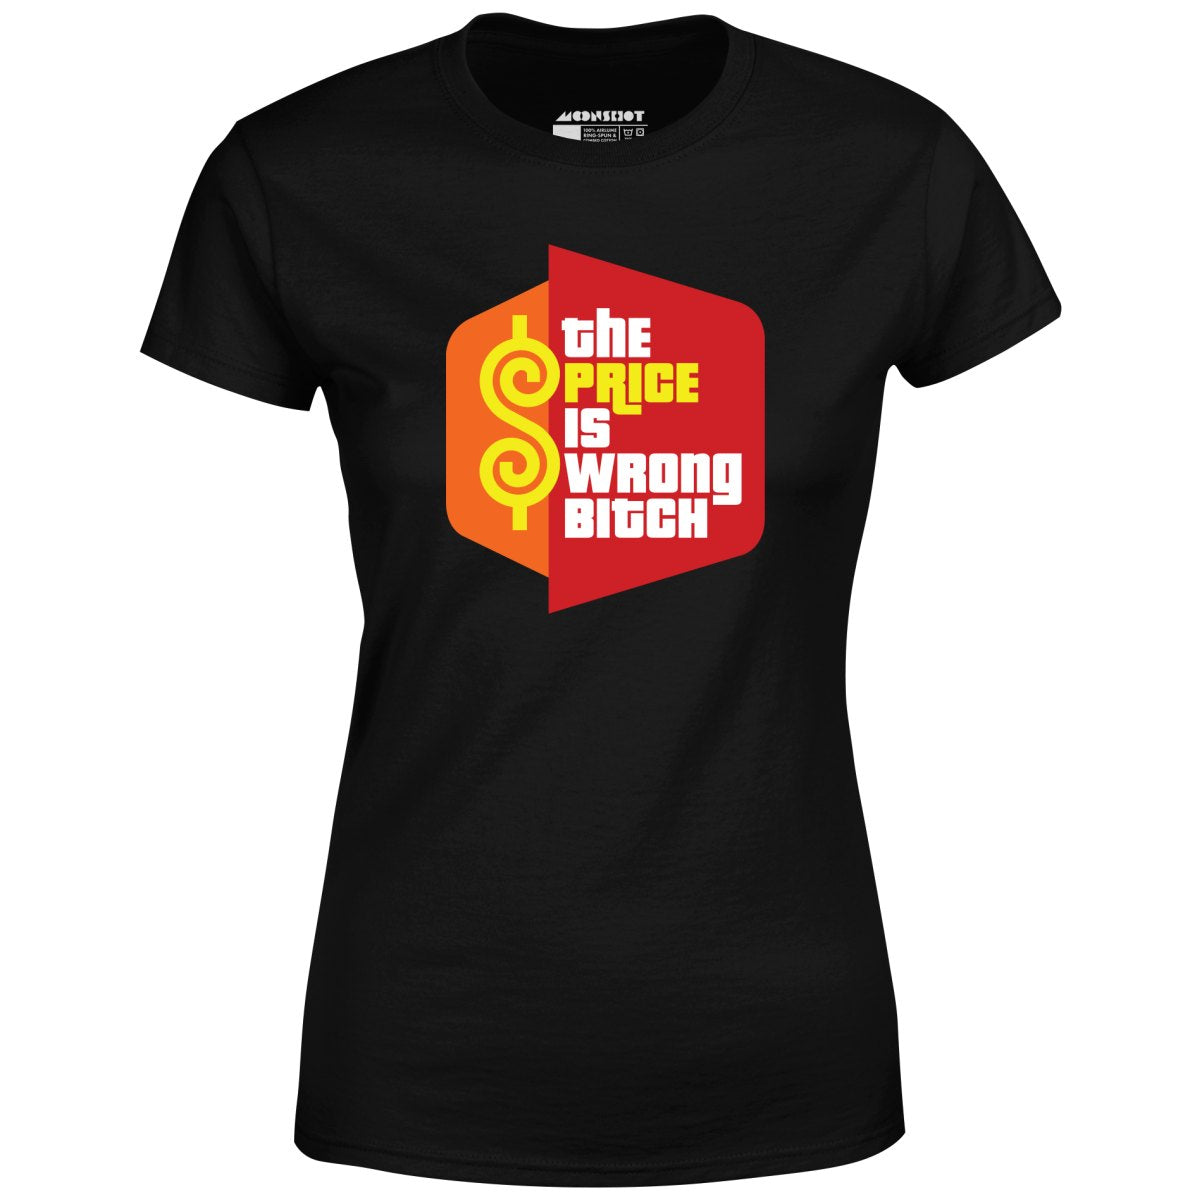 The Price is Wrong Bitch - Women's T-Shirt